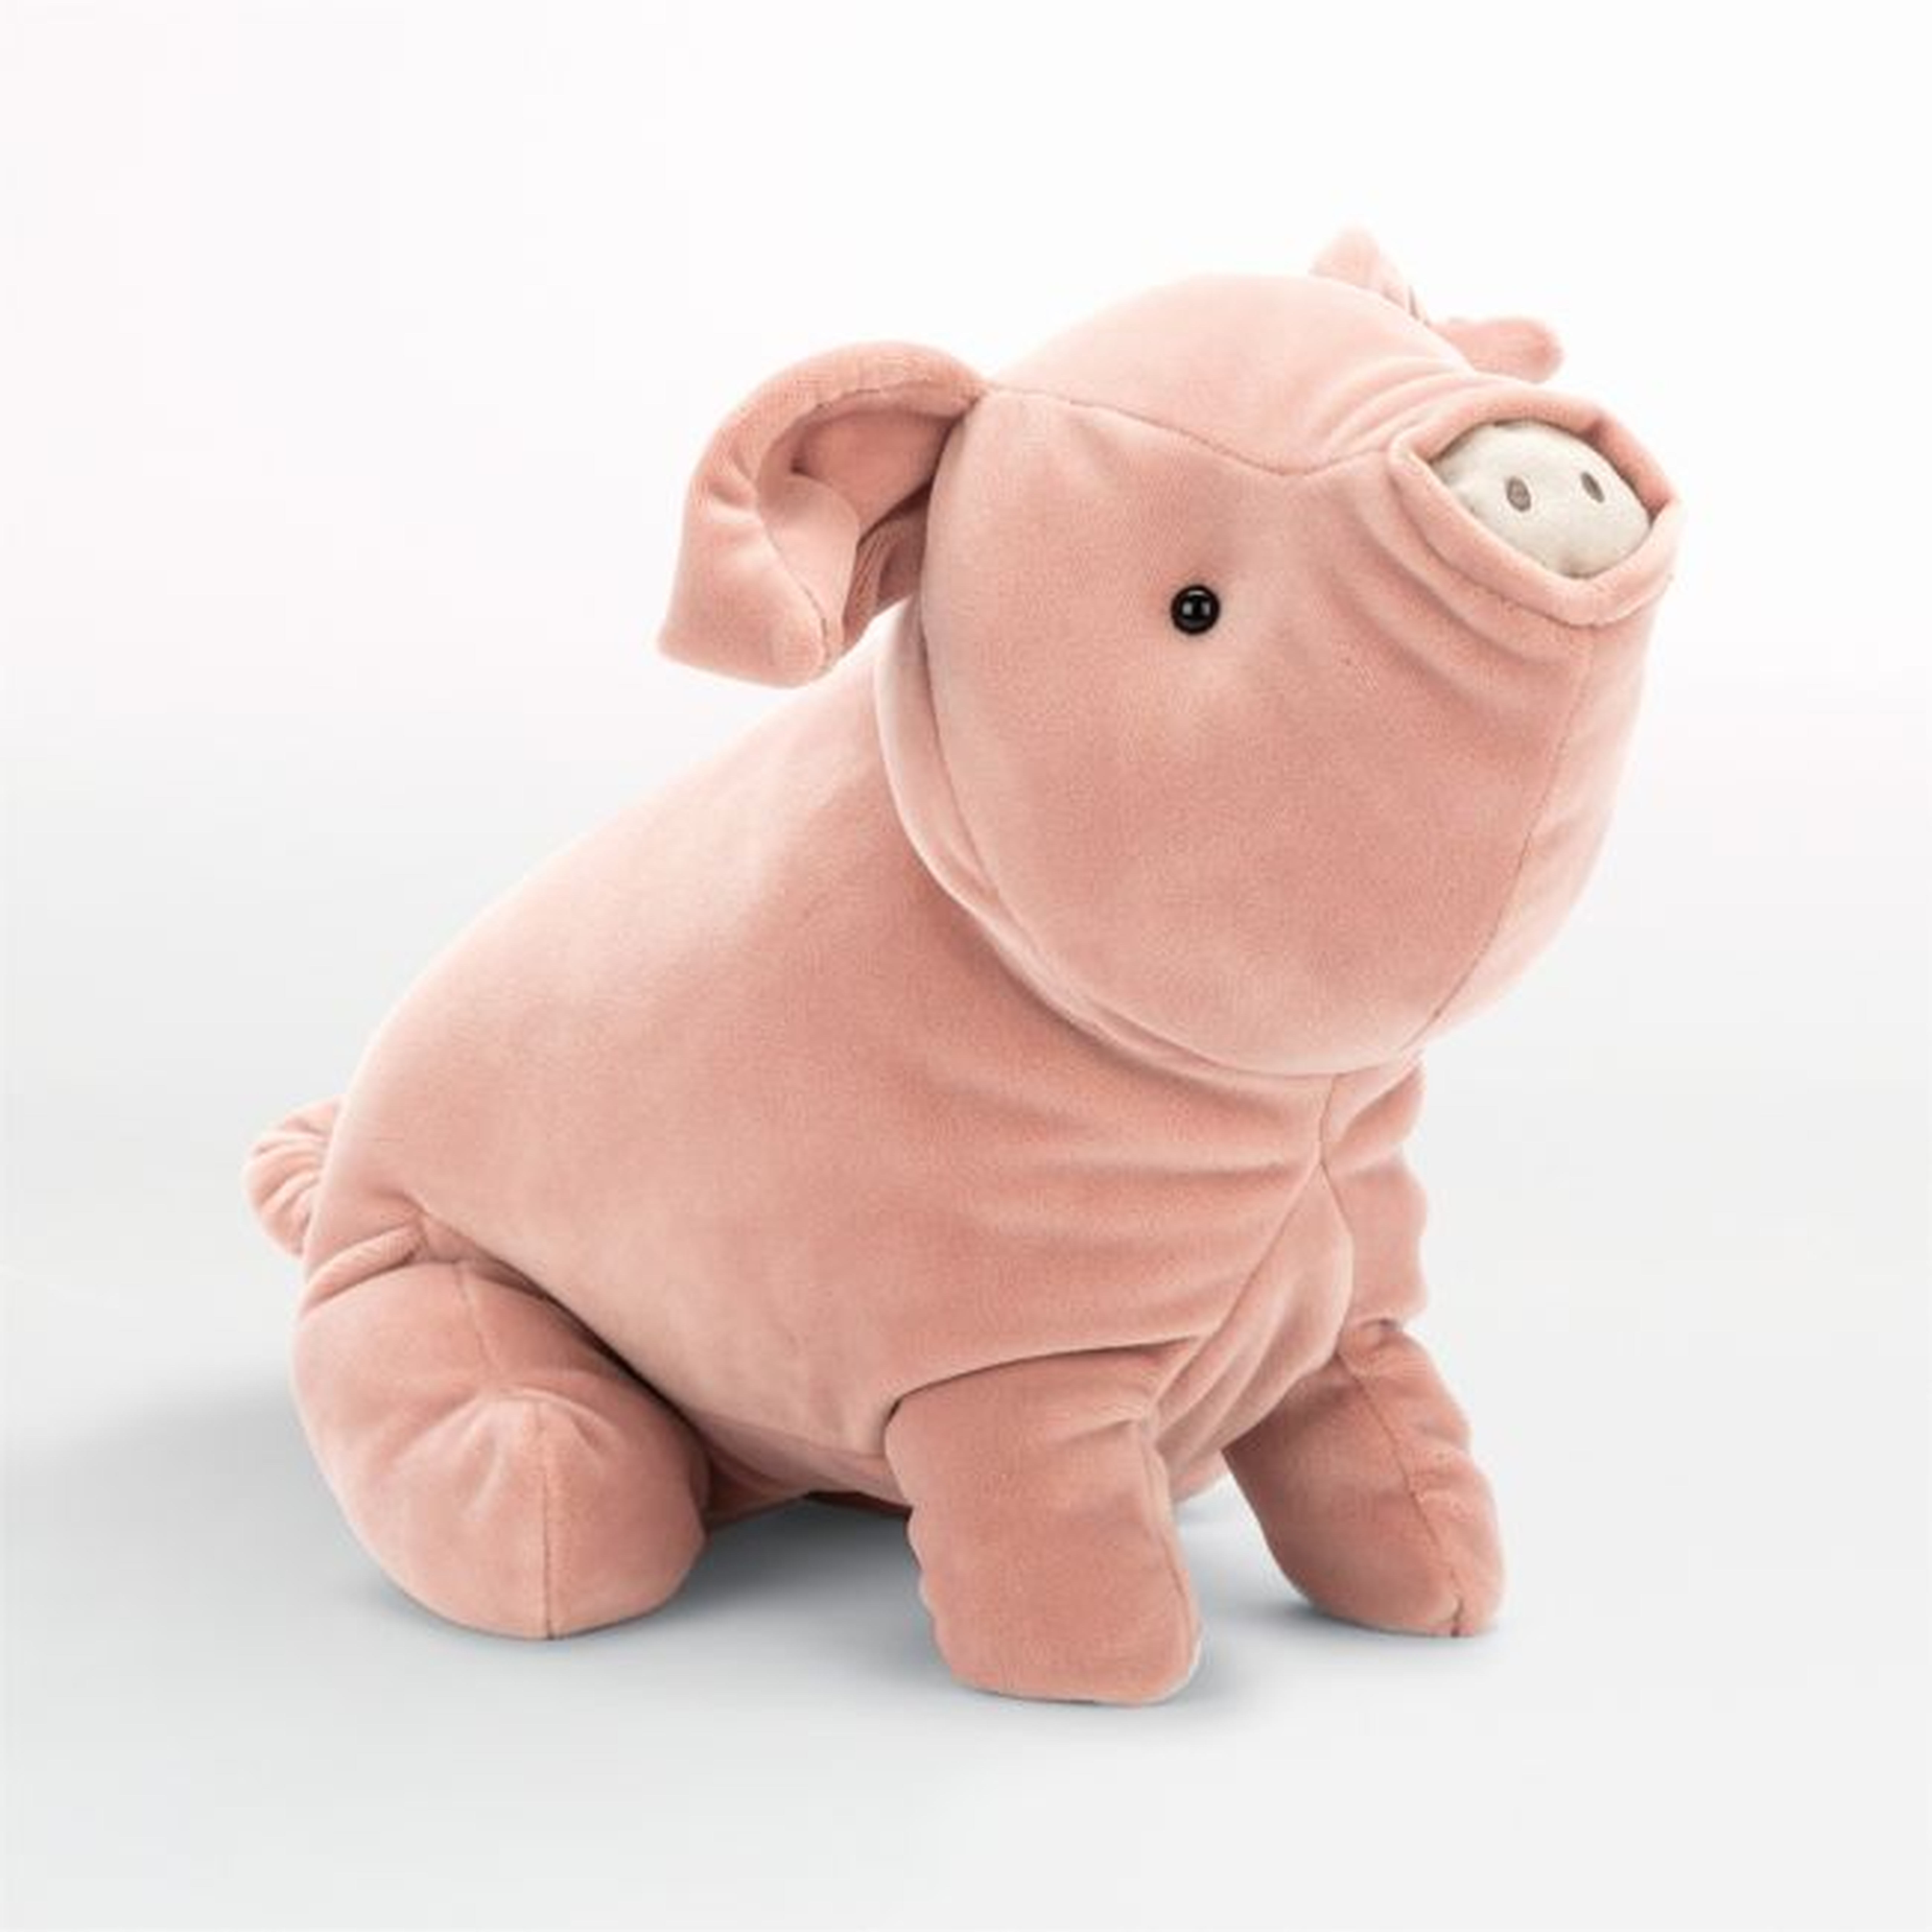 Jellycat ® Mellow Mallow Pig - Crate and Barrel